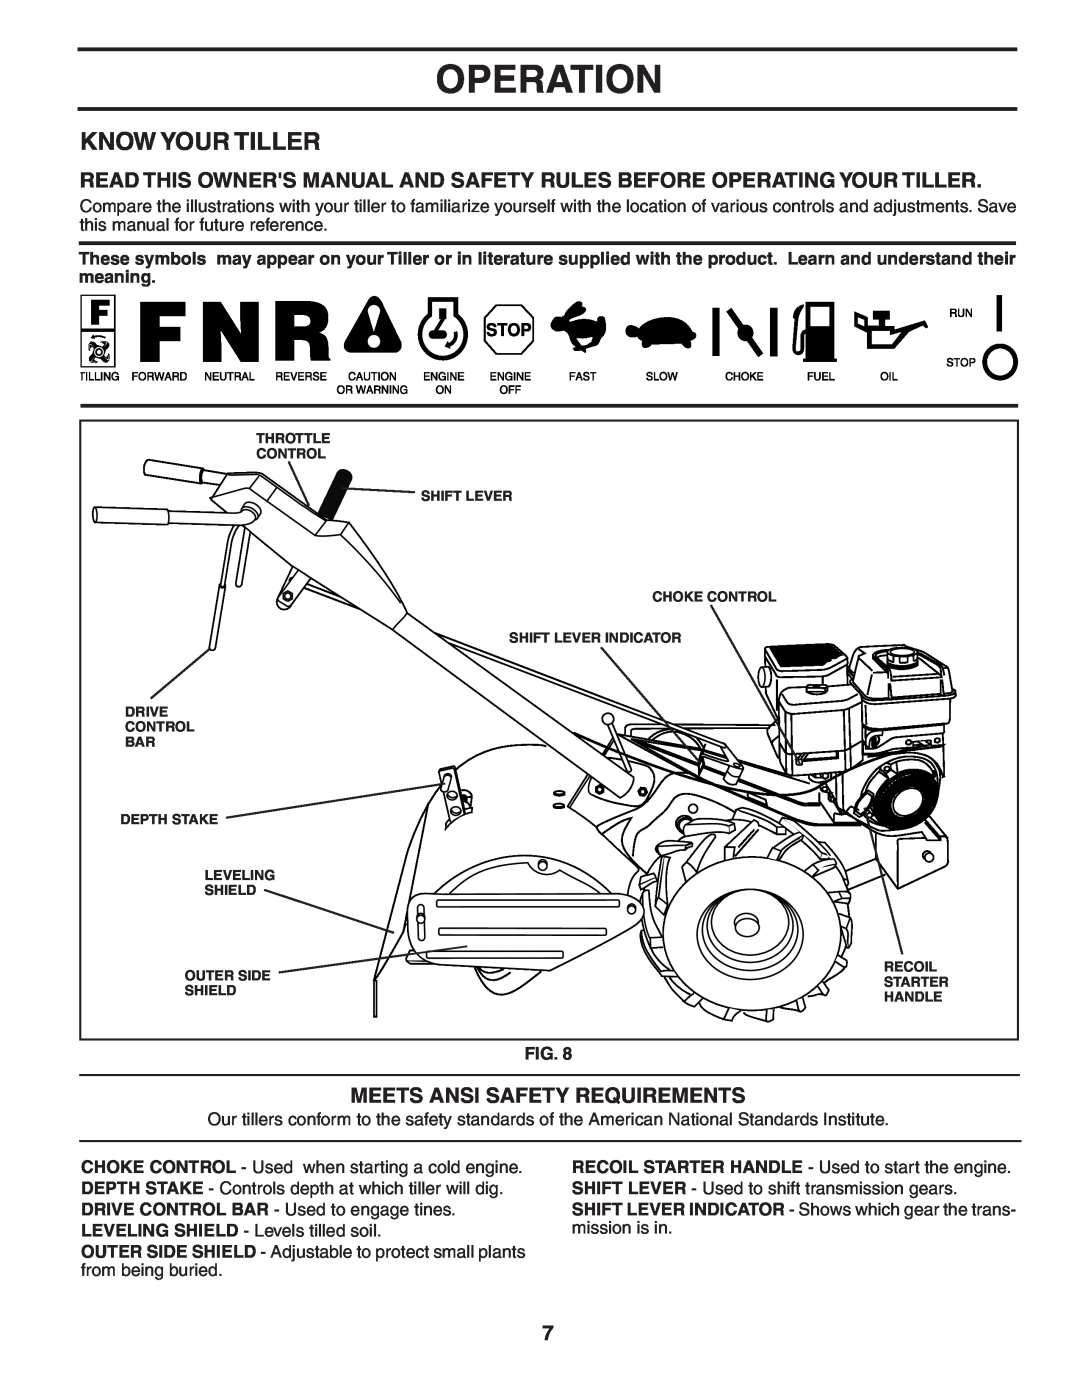 Poulan PRRT50 manual Operation, Know Your Tiller, Meets Ansi Safety Requirements 